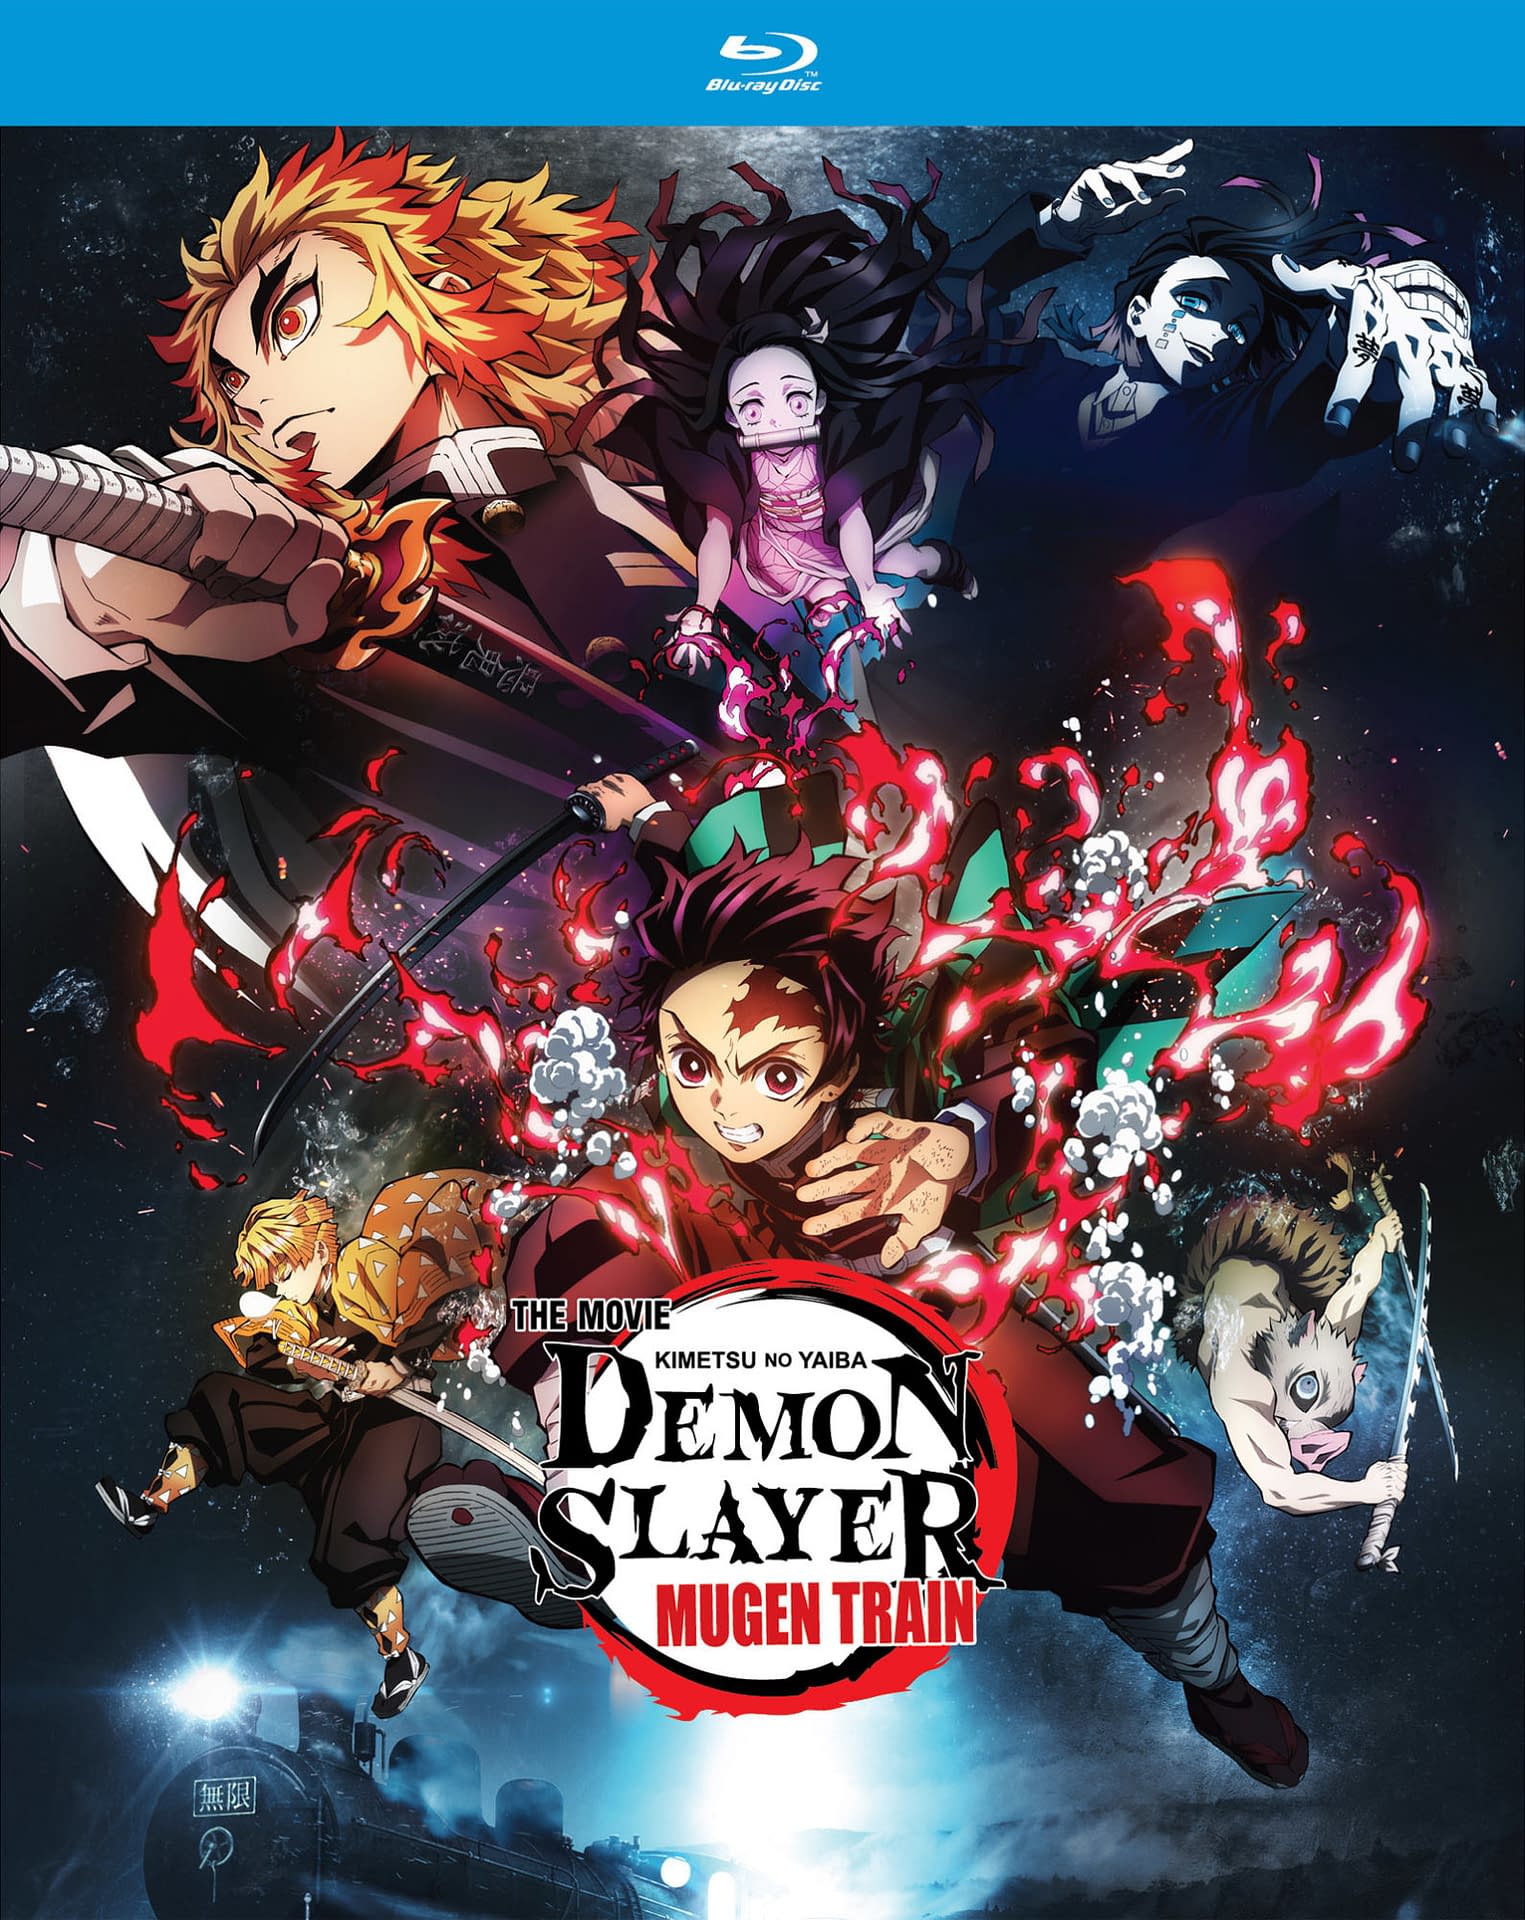 Movie review: Anime megahit 'Demon Slayer' is here to thrill and confuse